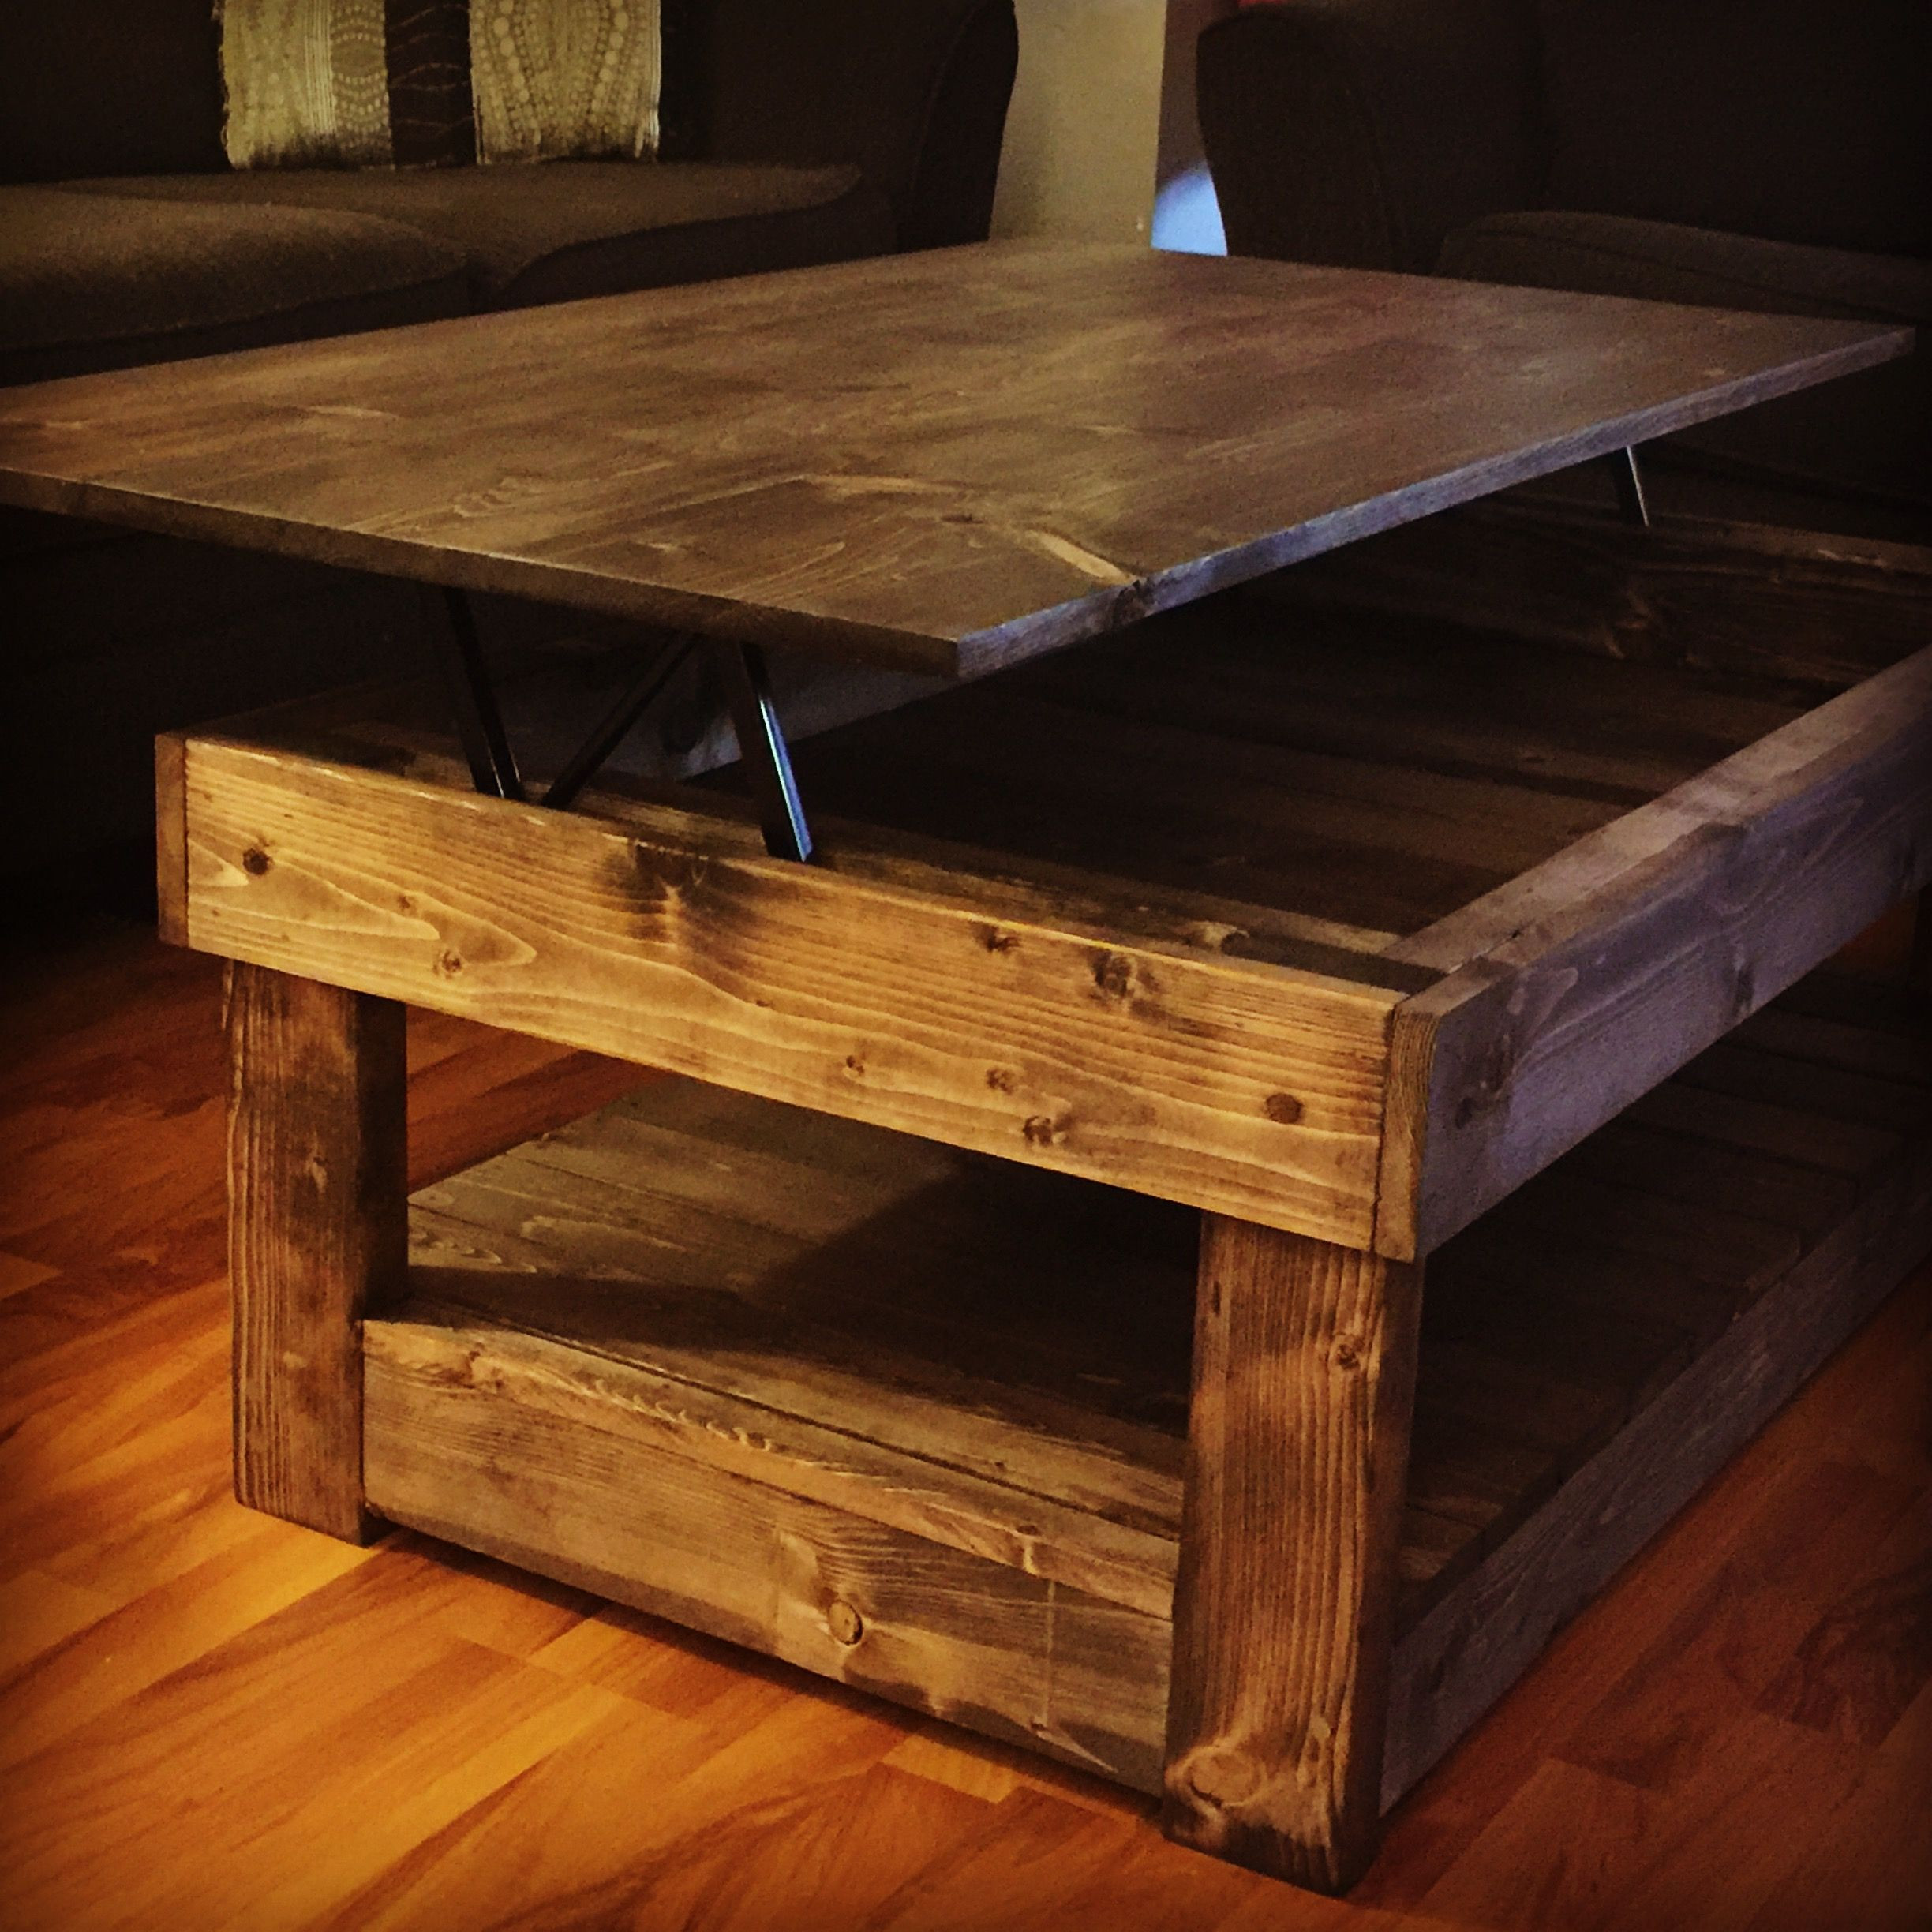 DIY Lift Top Coffee Table Plans
 Rustic lift top coffee table